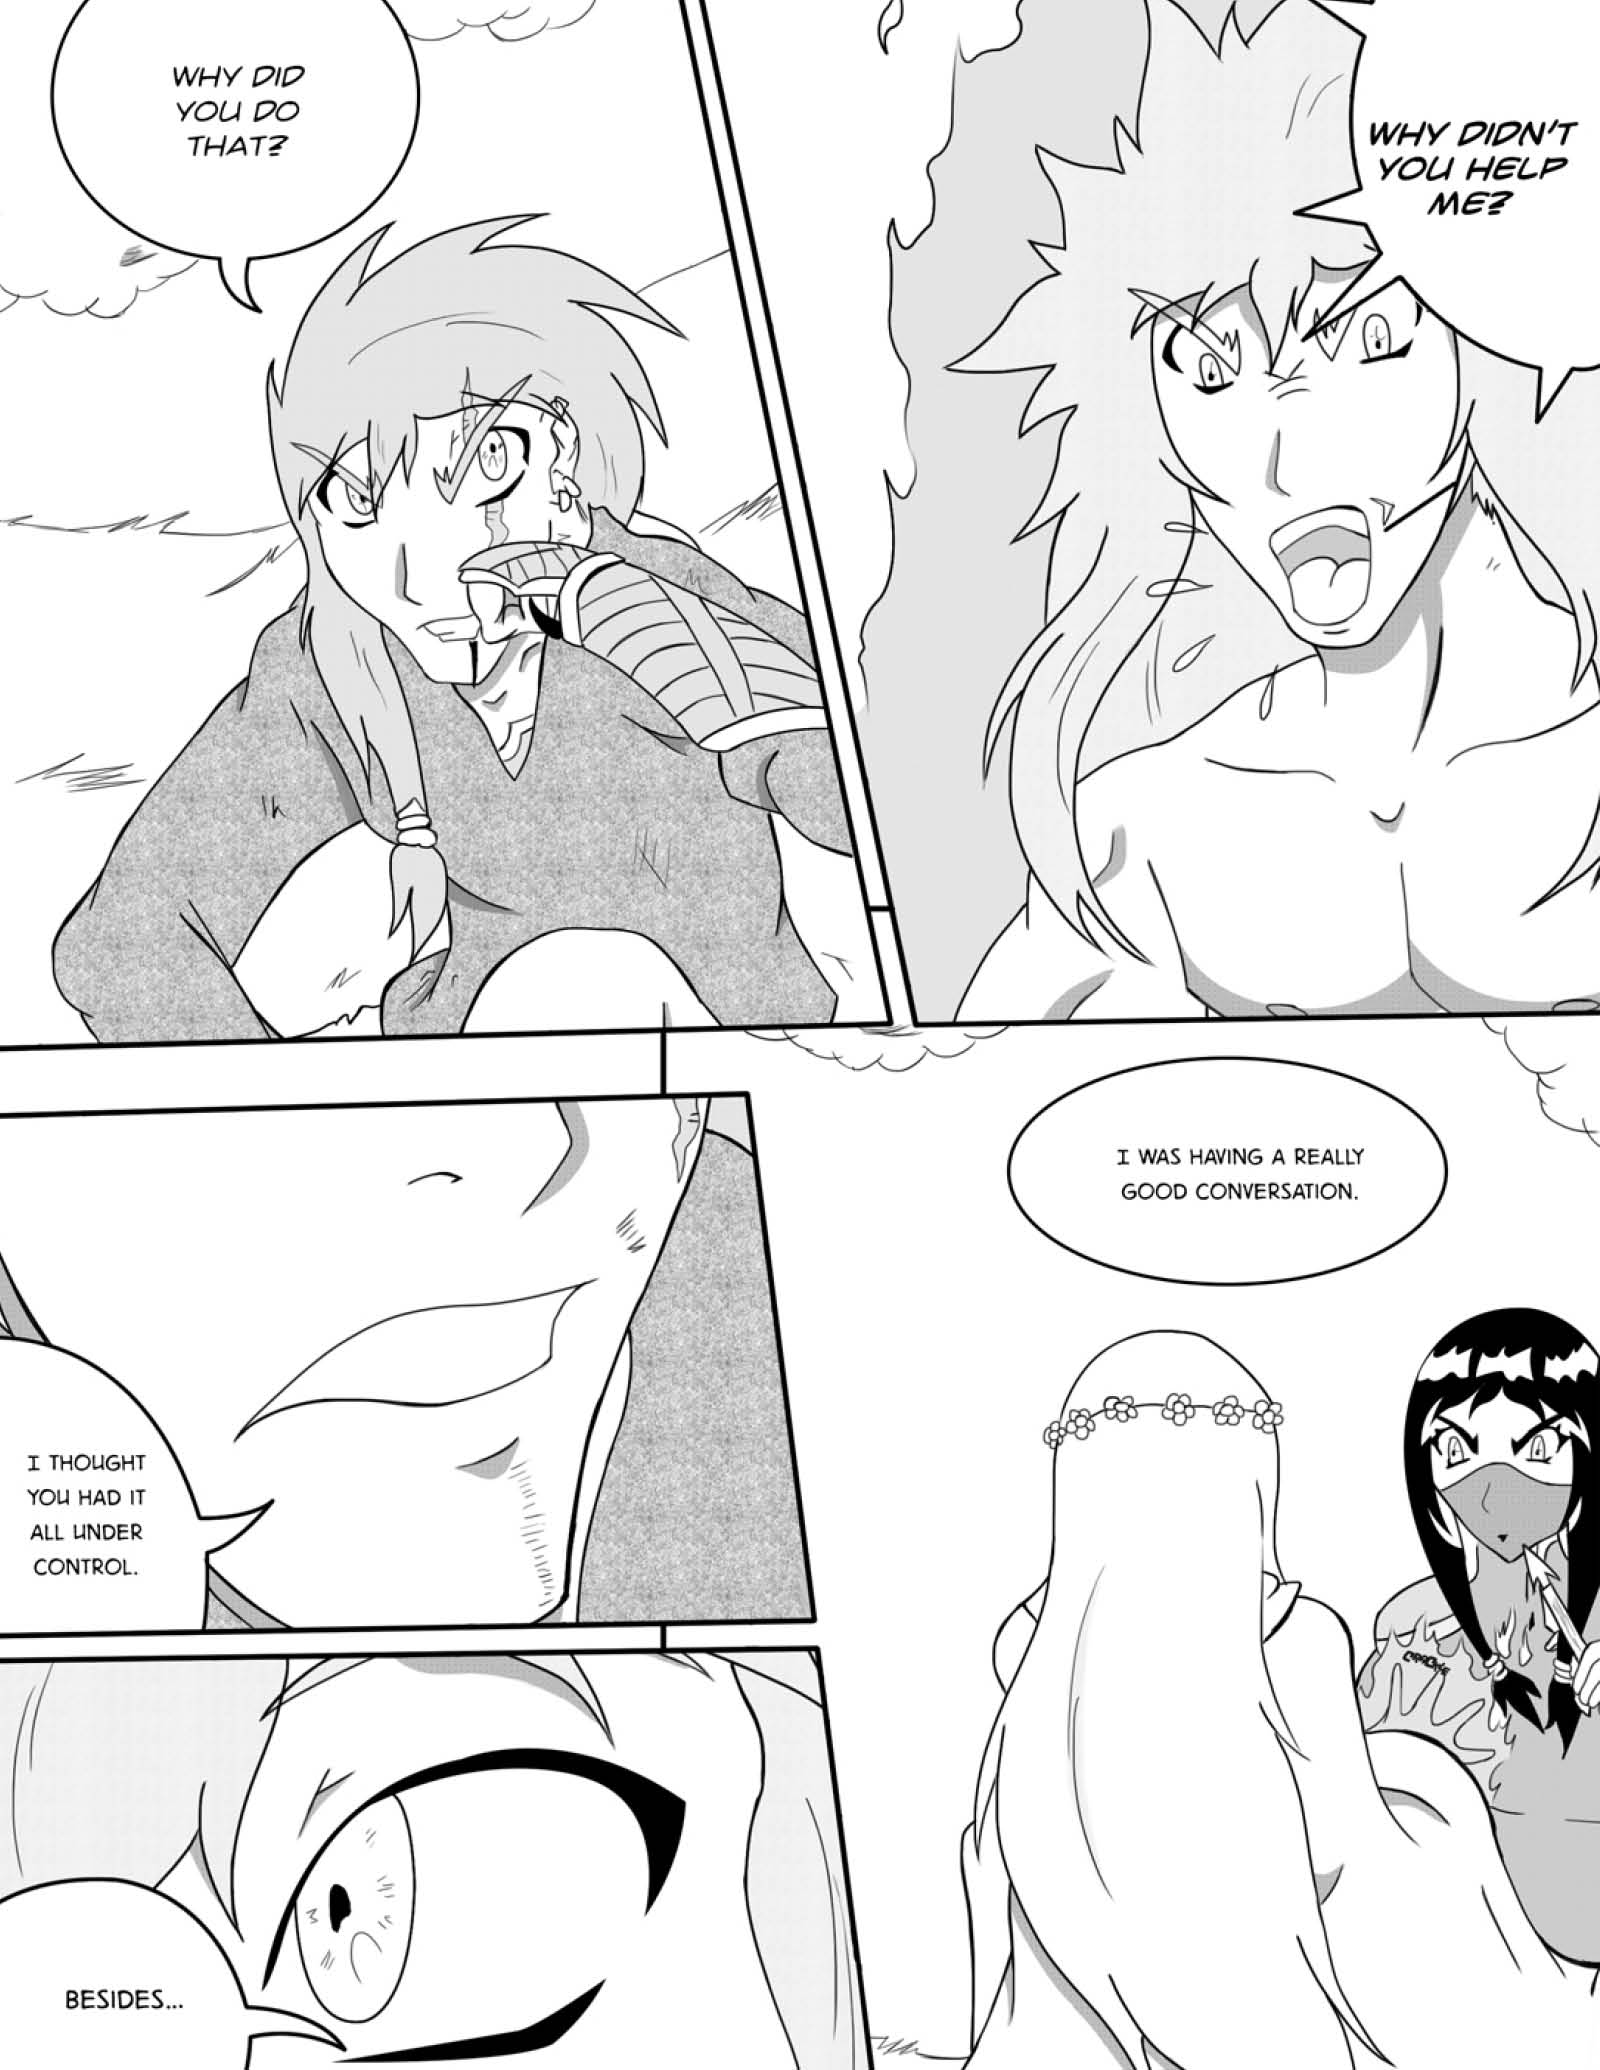 Series Dilan: the Chronicles of Covak - Chapter 7 - Page 16 - Language ENG